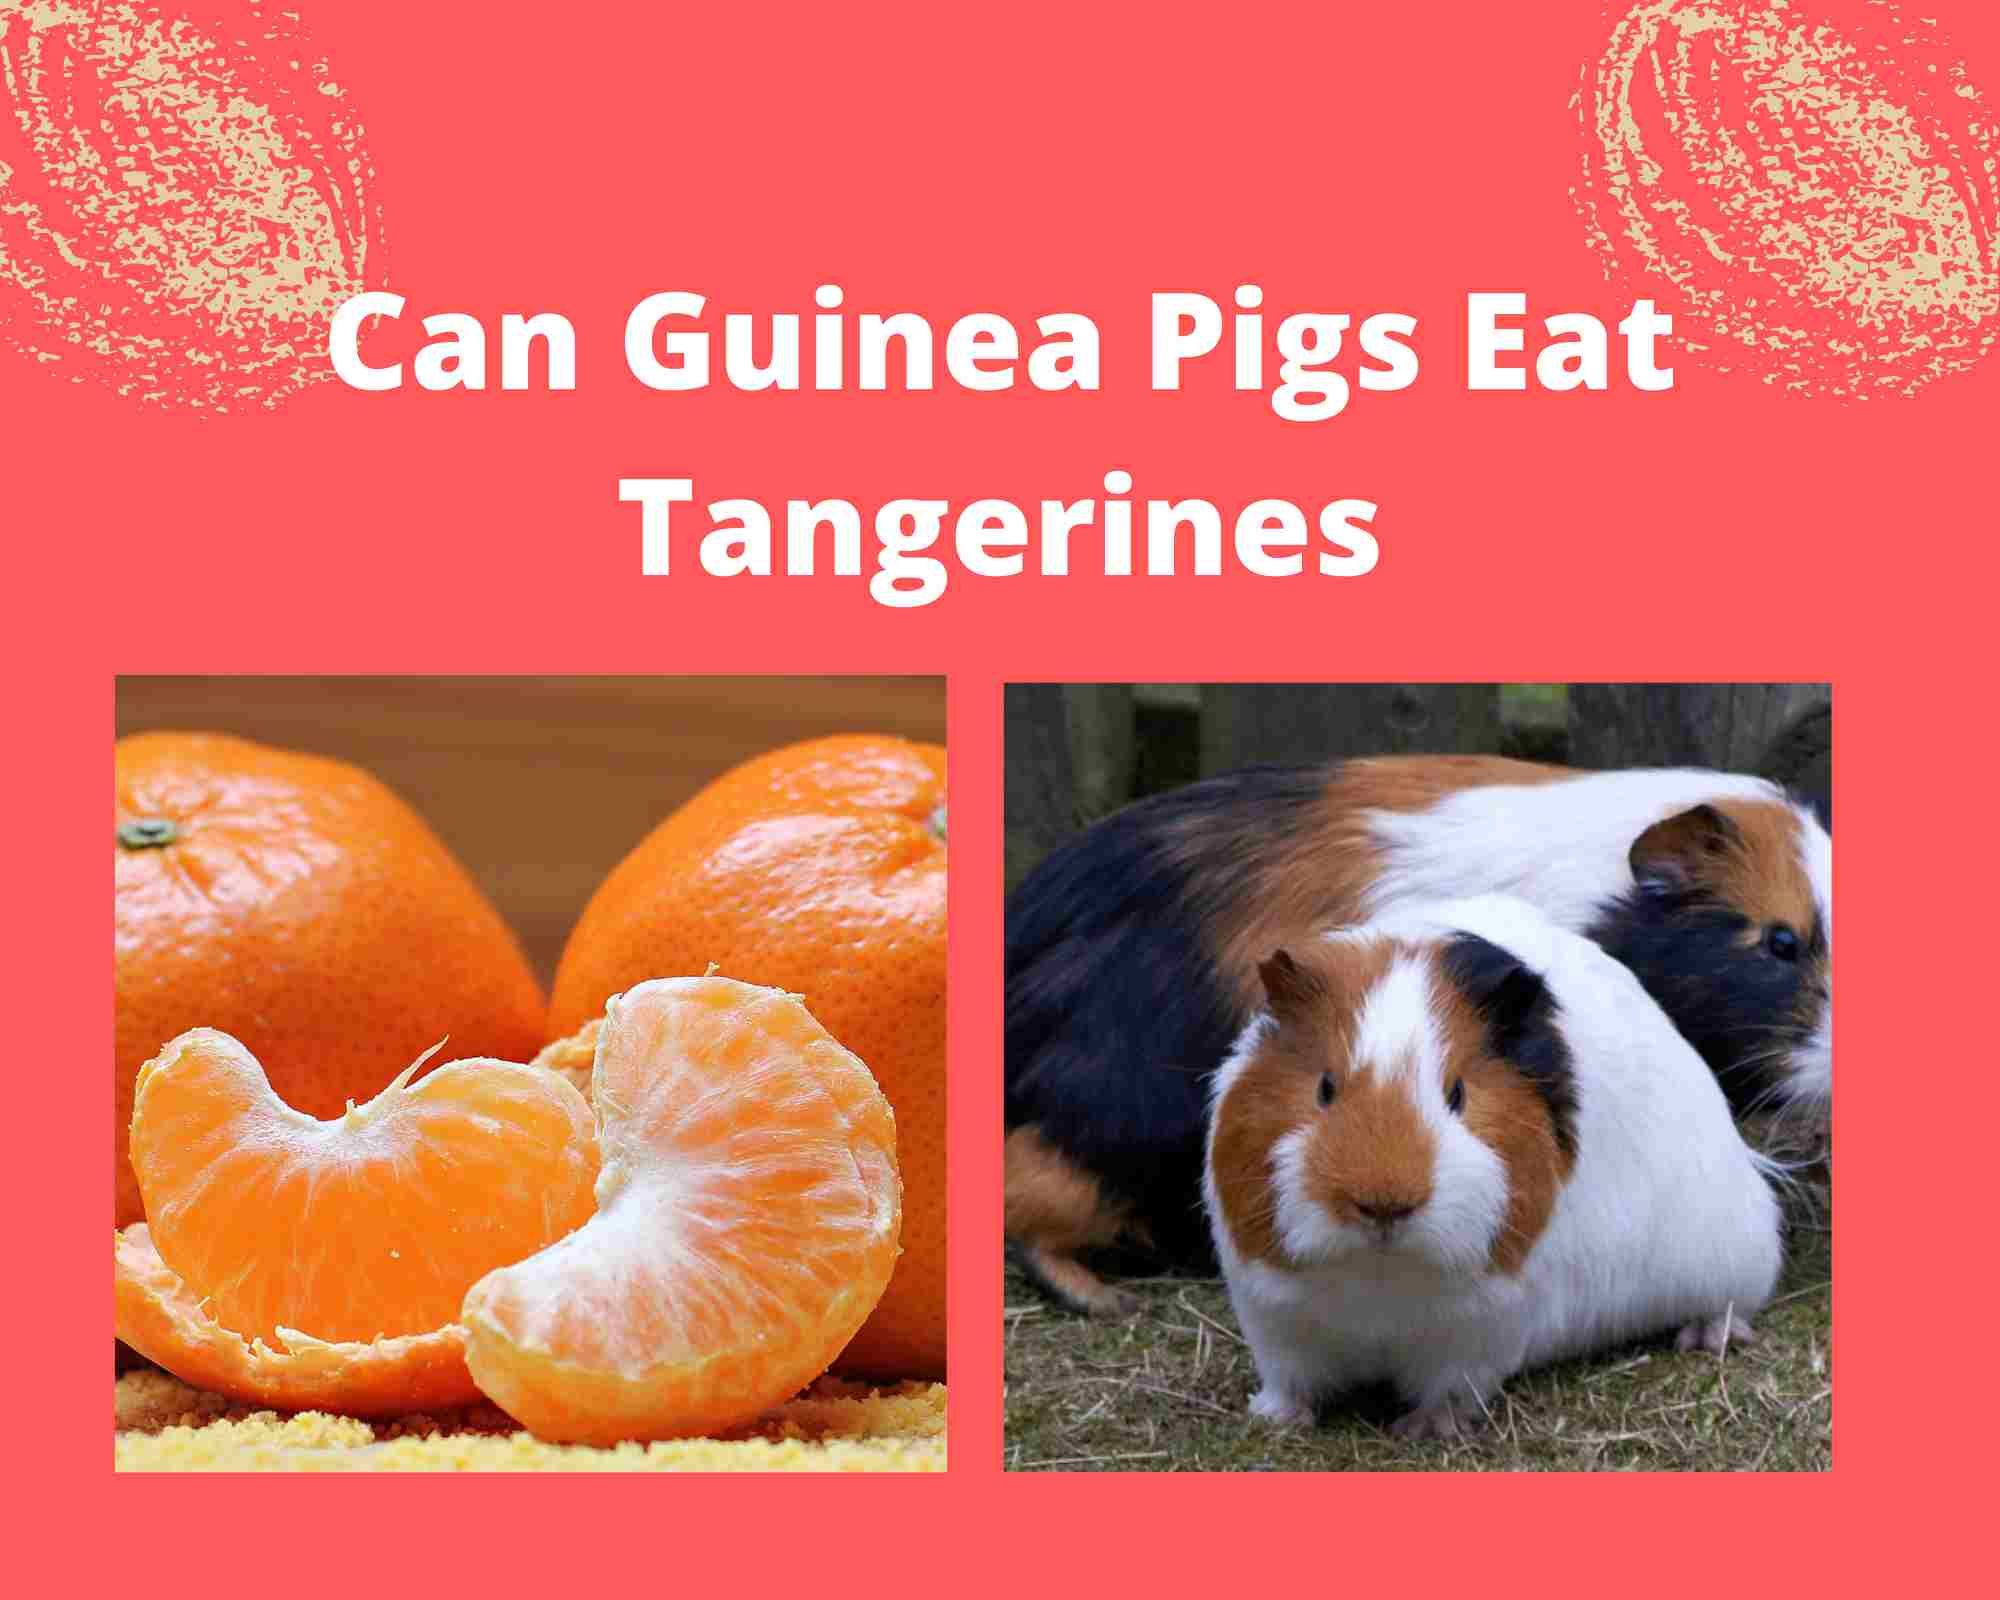 Can Guinea Pigs Eat Tangerines